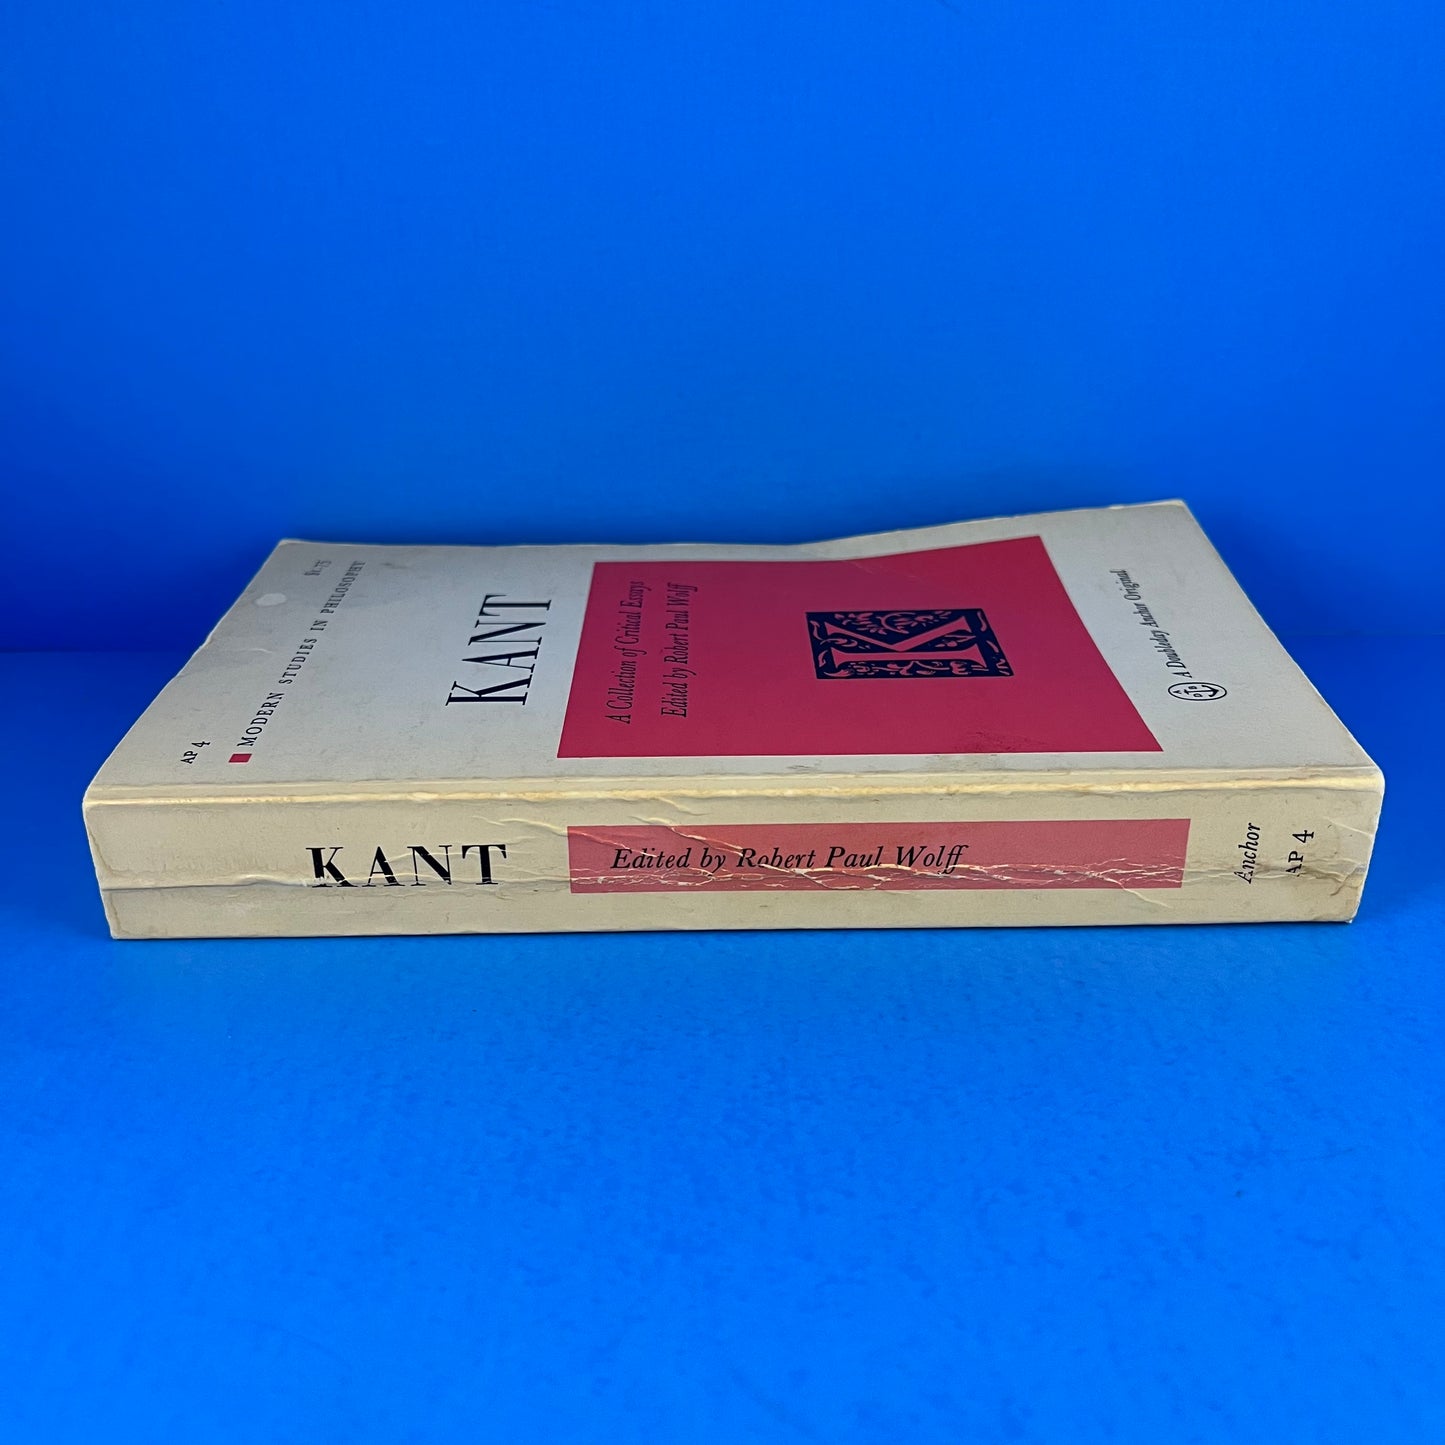 Kant: A Collection of Critical Essays